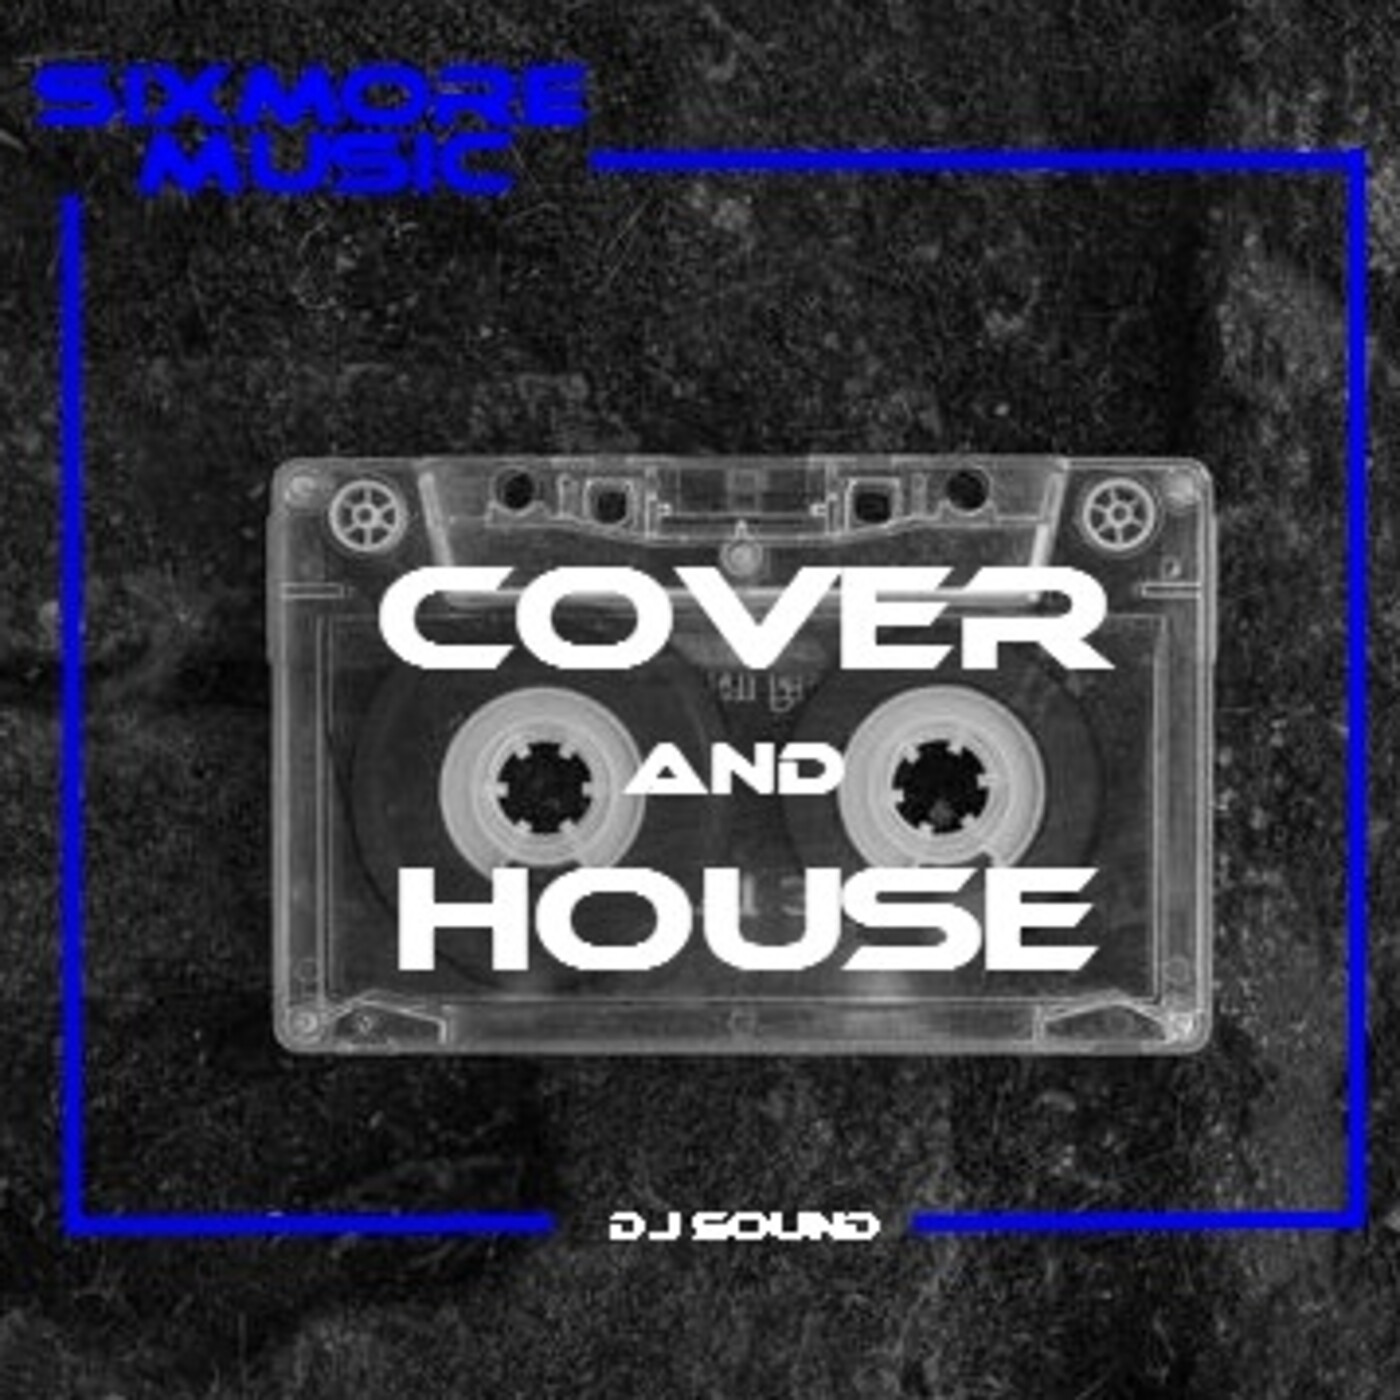 Cover and house